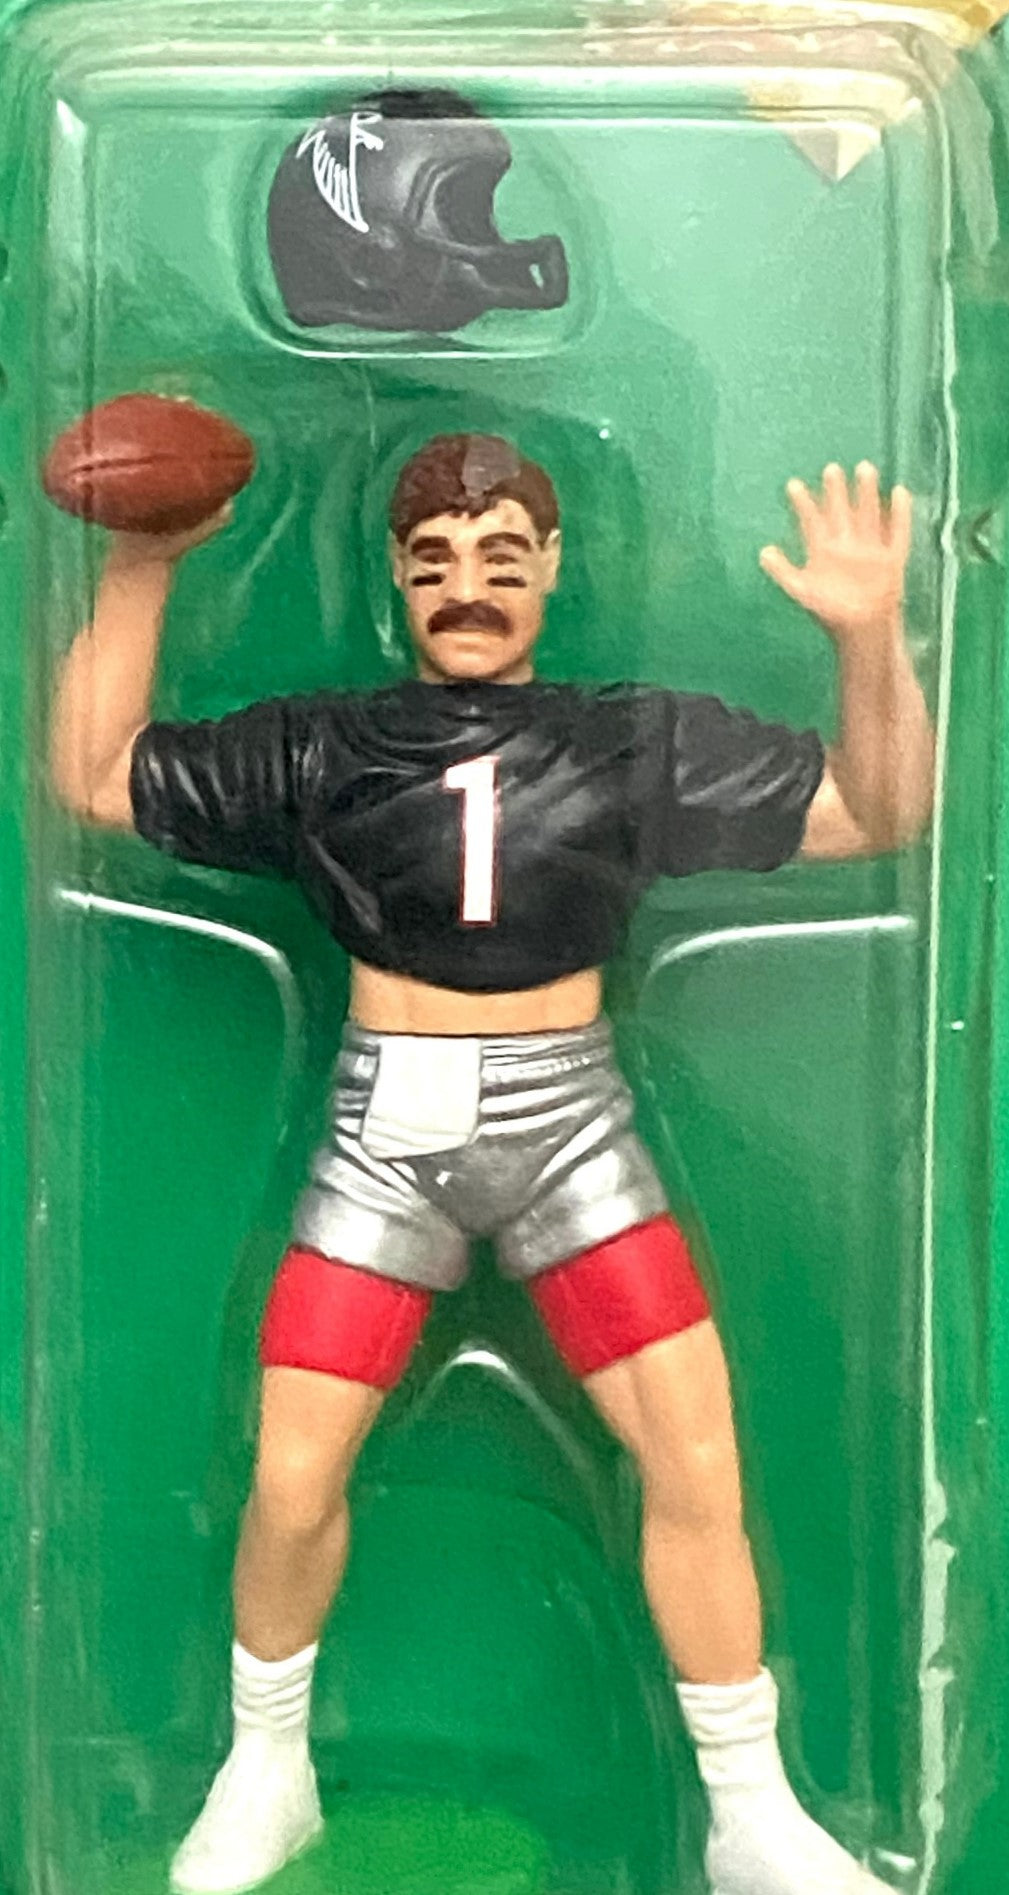 Jeff George 1995 NFL Atlanta Falcons NOS Starting Lineup Figurine by Kenner